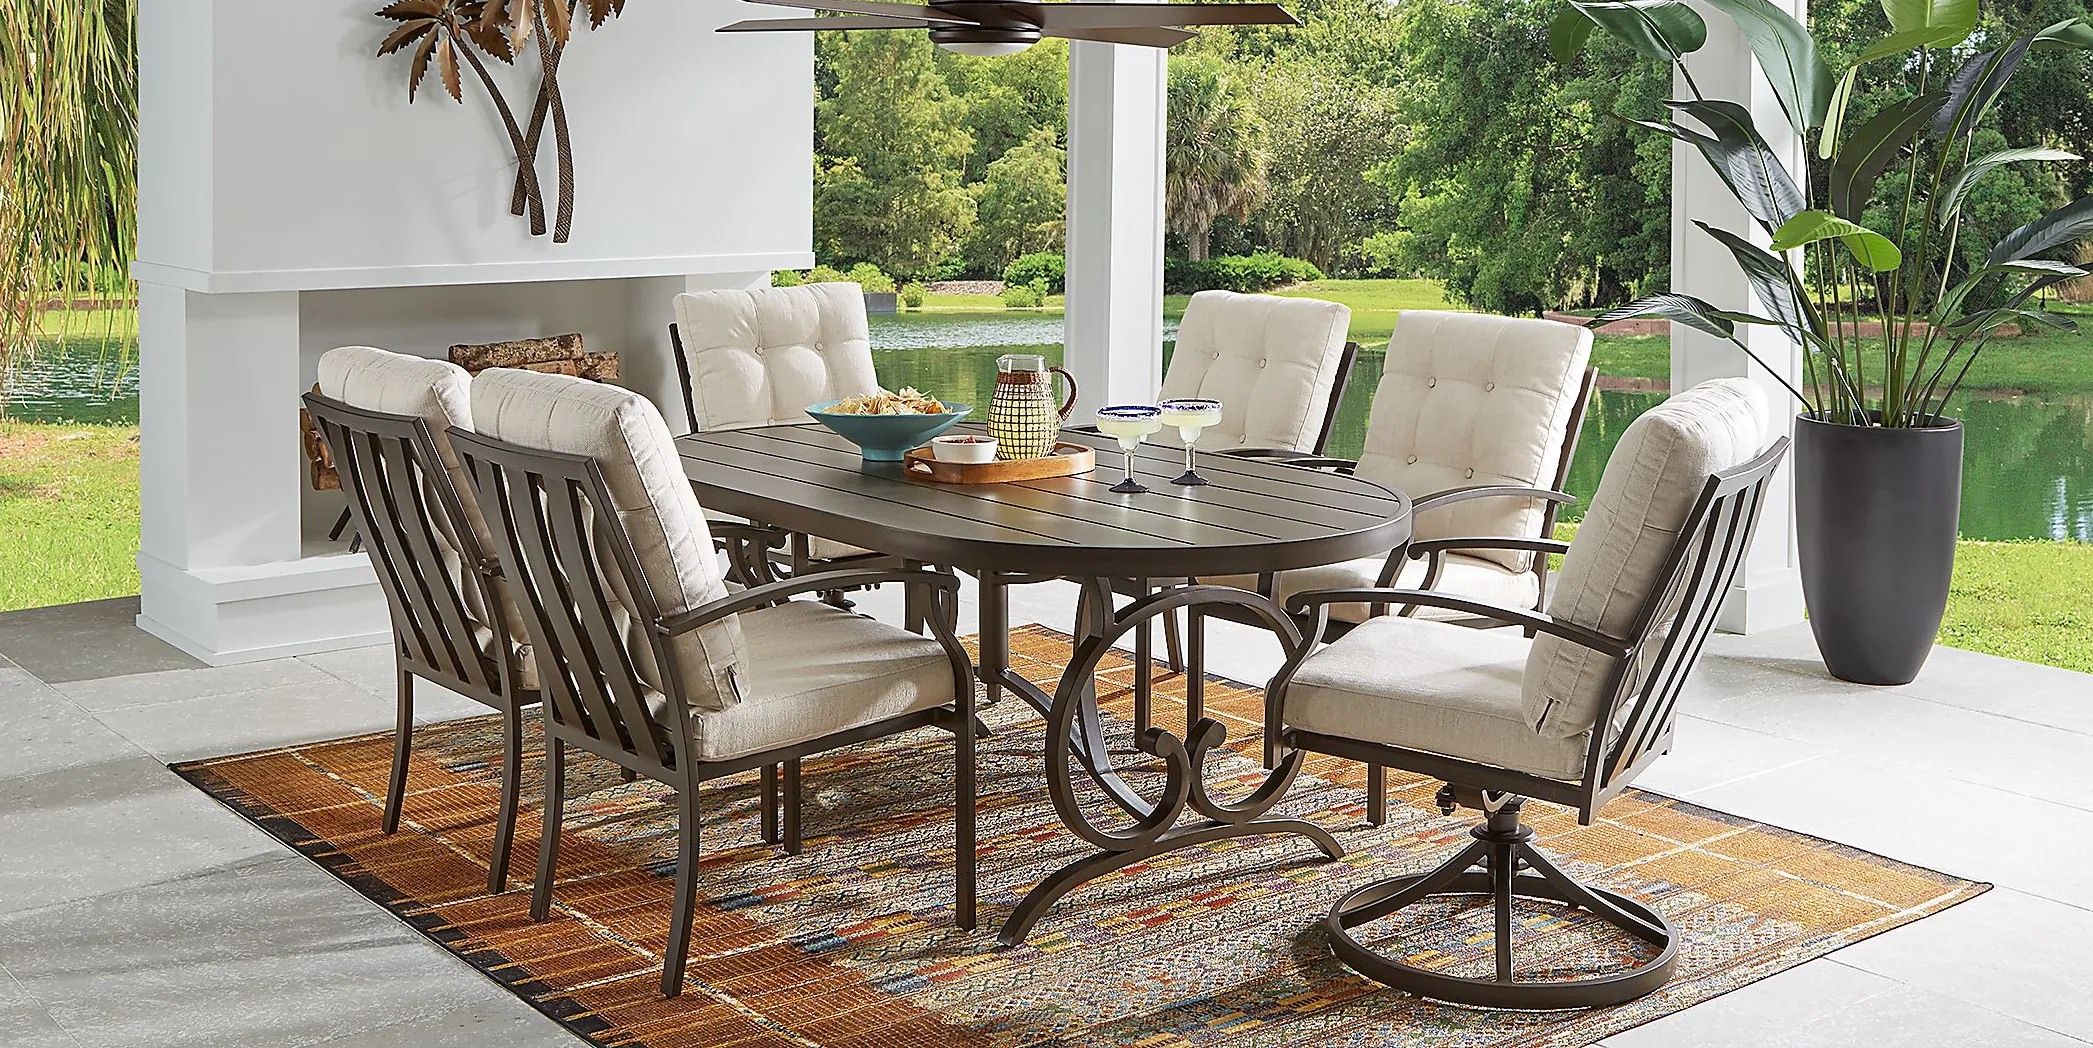 Lake Breeze Aged Bronze 7 Pc Outdoor 78 in. Oval Dining Set with Parchment Cushions